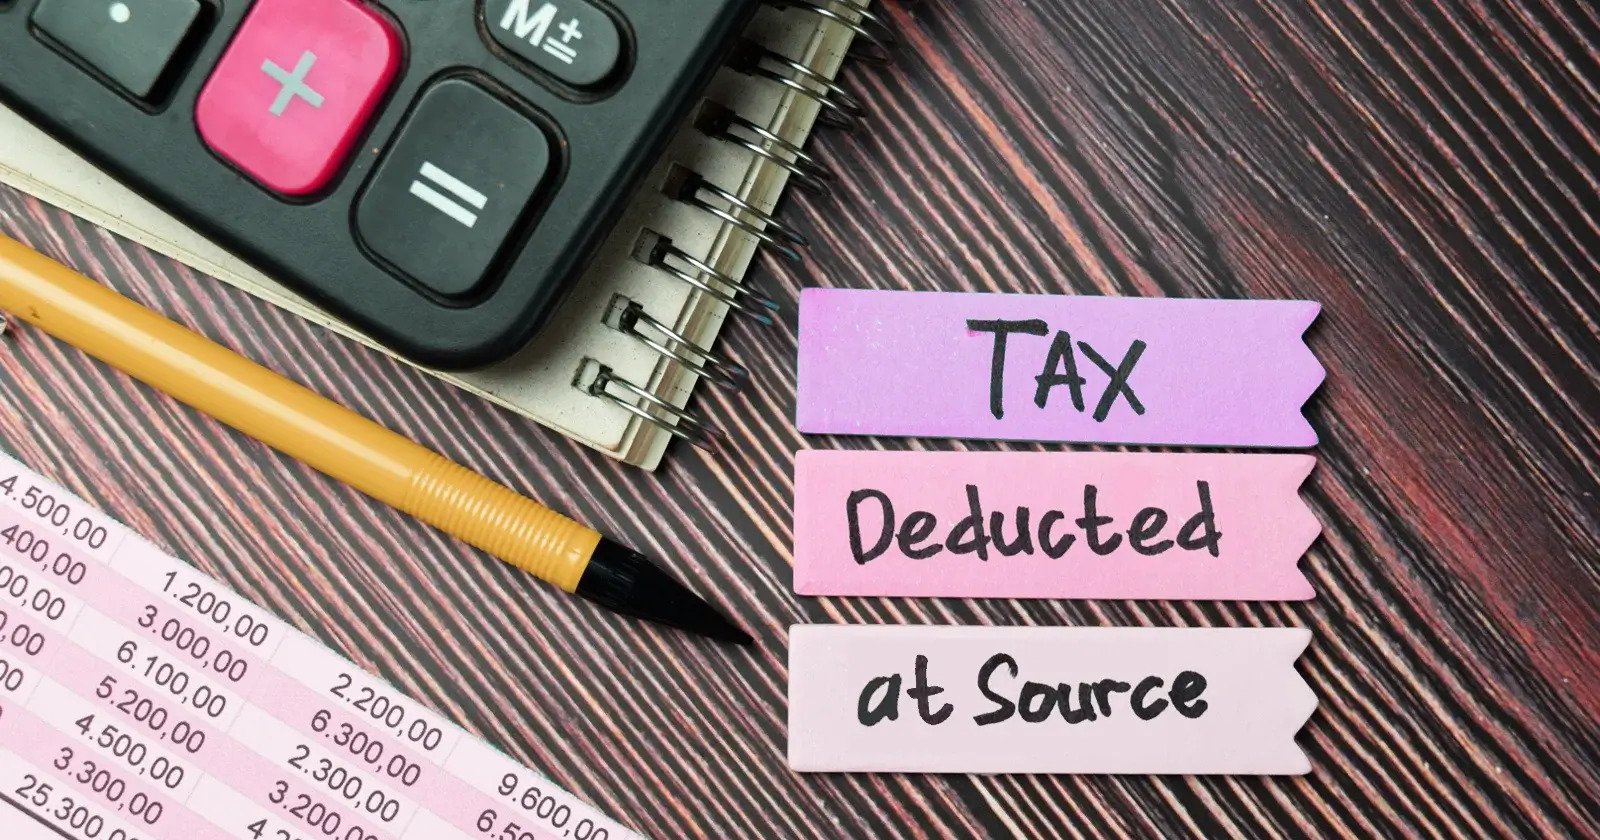  TAX DEDUCTED AT SOURCE 